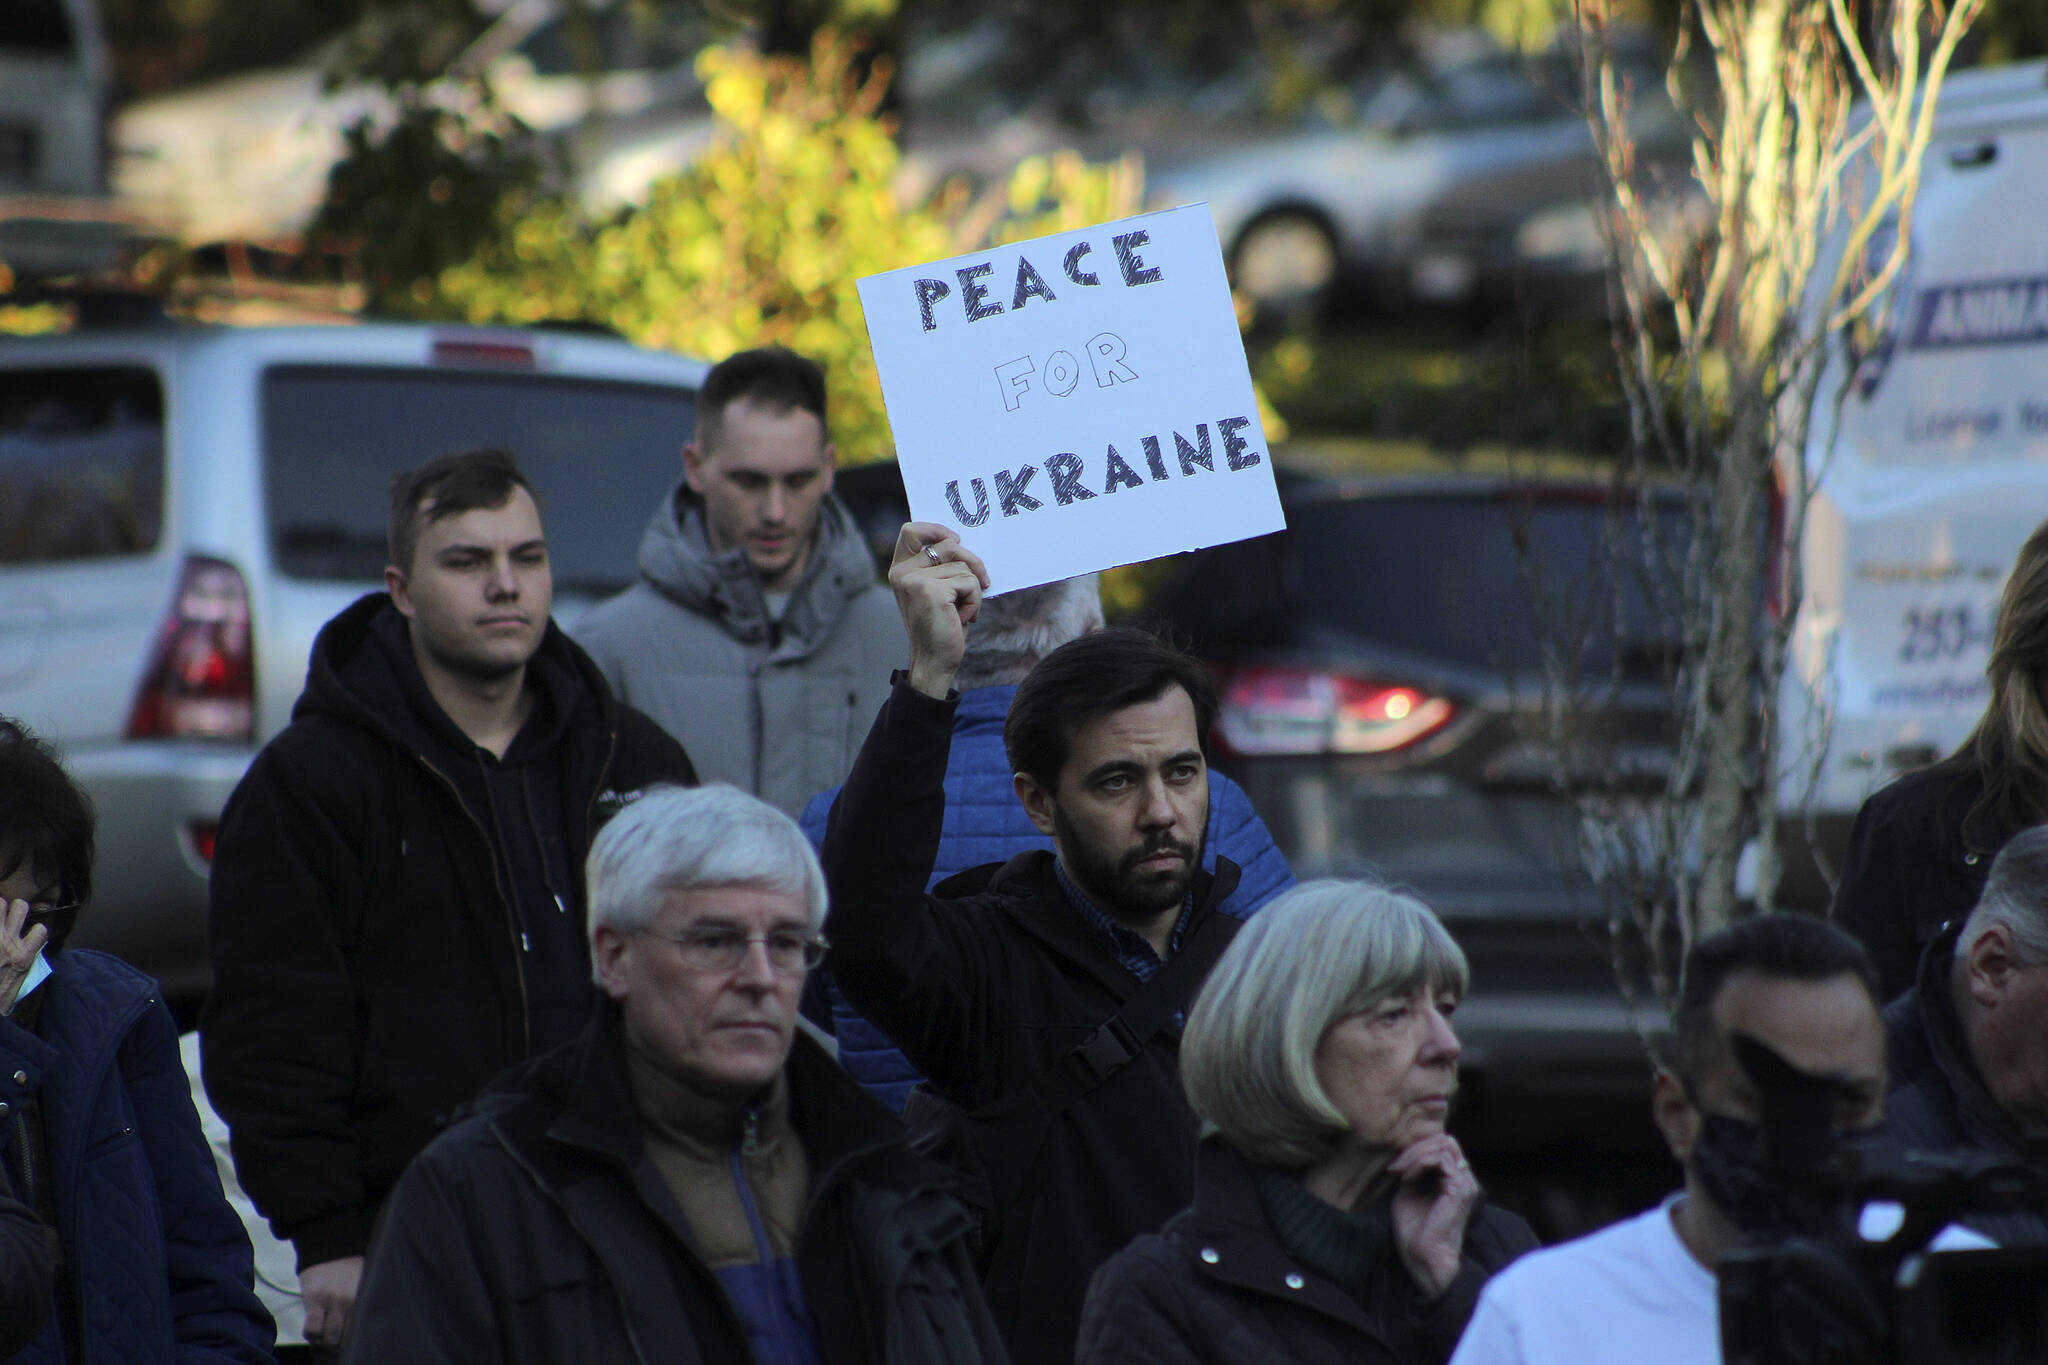 Igor Soloydenko, who said he identifies as Russian, holds a sign urging “Peace for Ukraine.” Soloydenko said “… there’s just so much shame. I feel helpless in the way I cannot change anything in my home country. It was unimaginable that Russia would do such a thing.” Olivia Sullivan/the Mirror